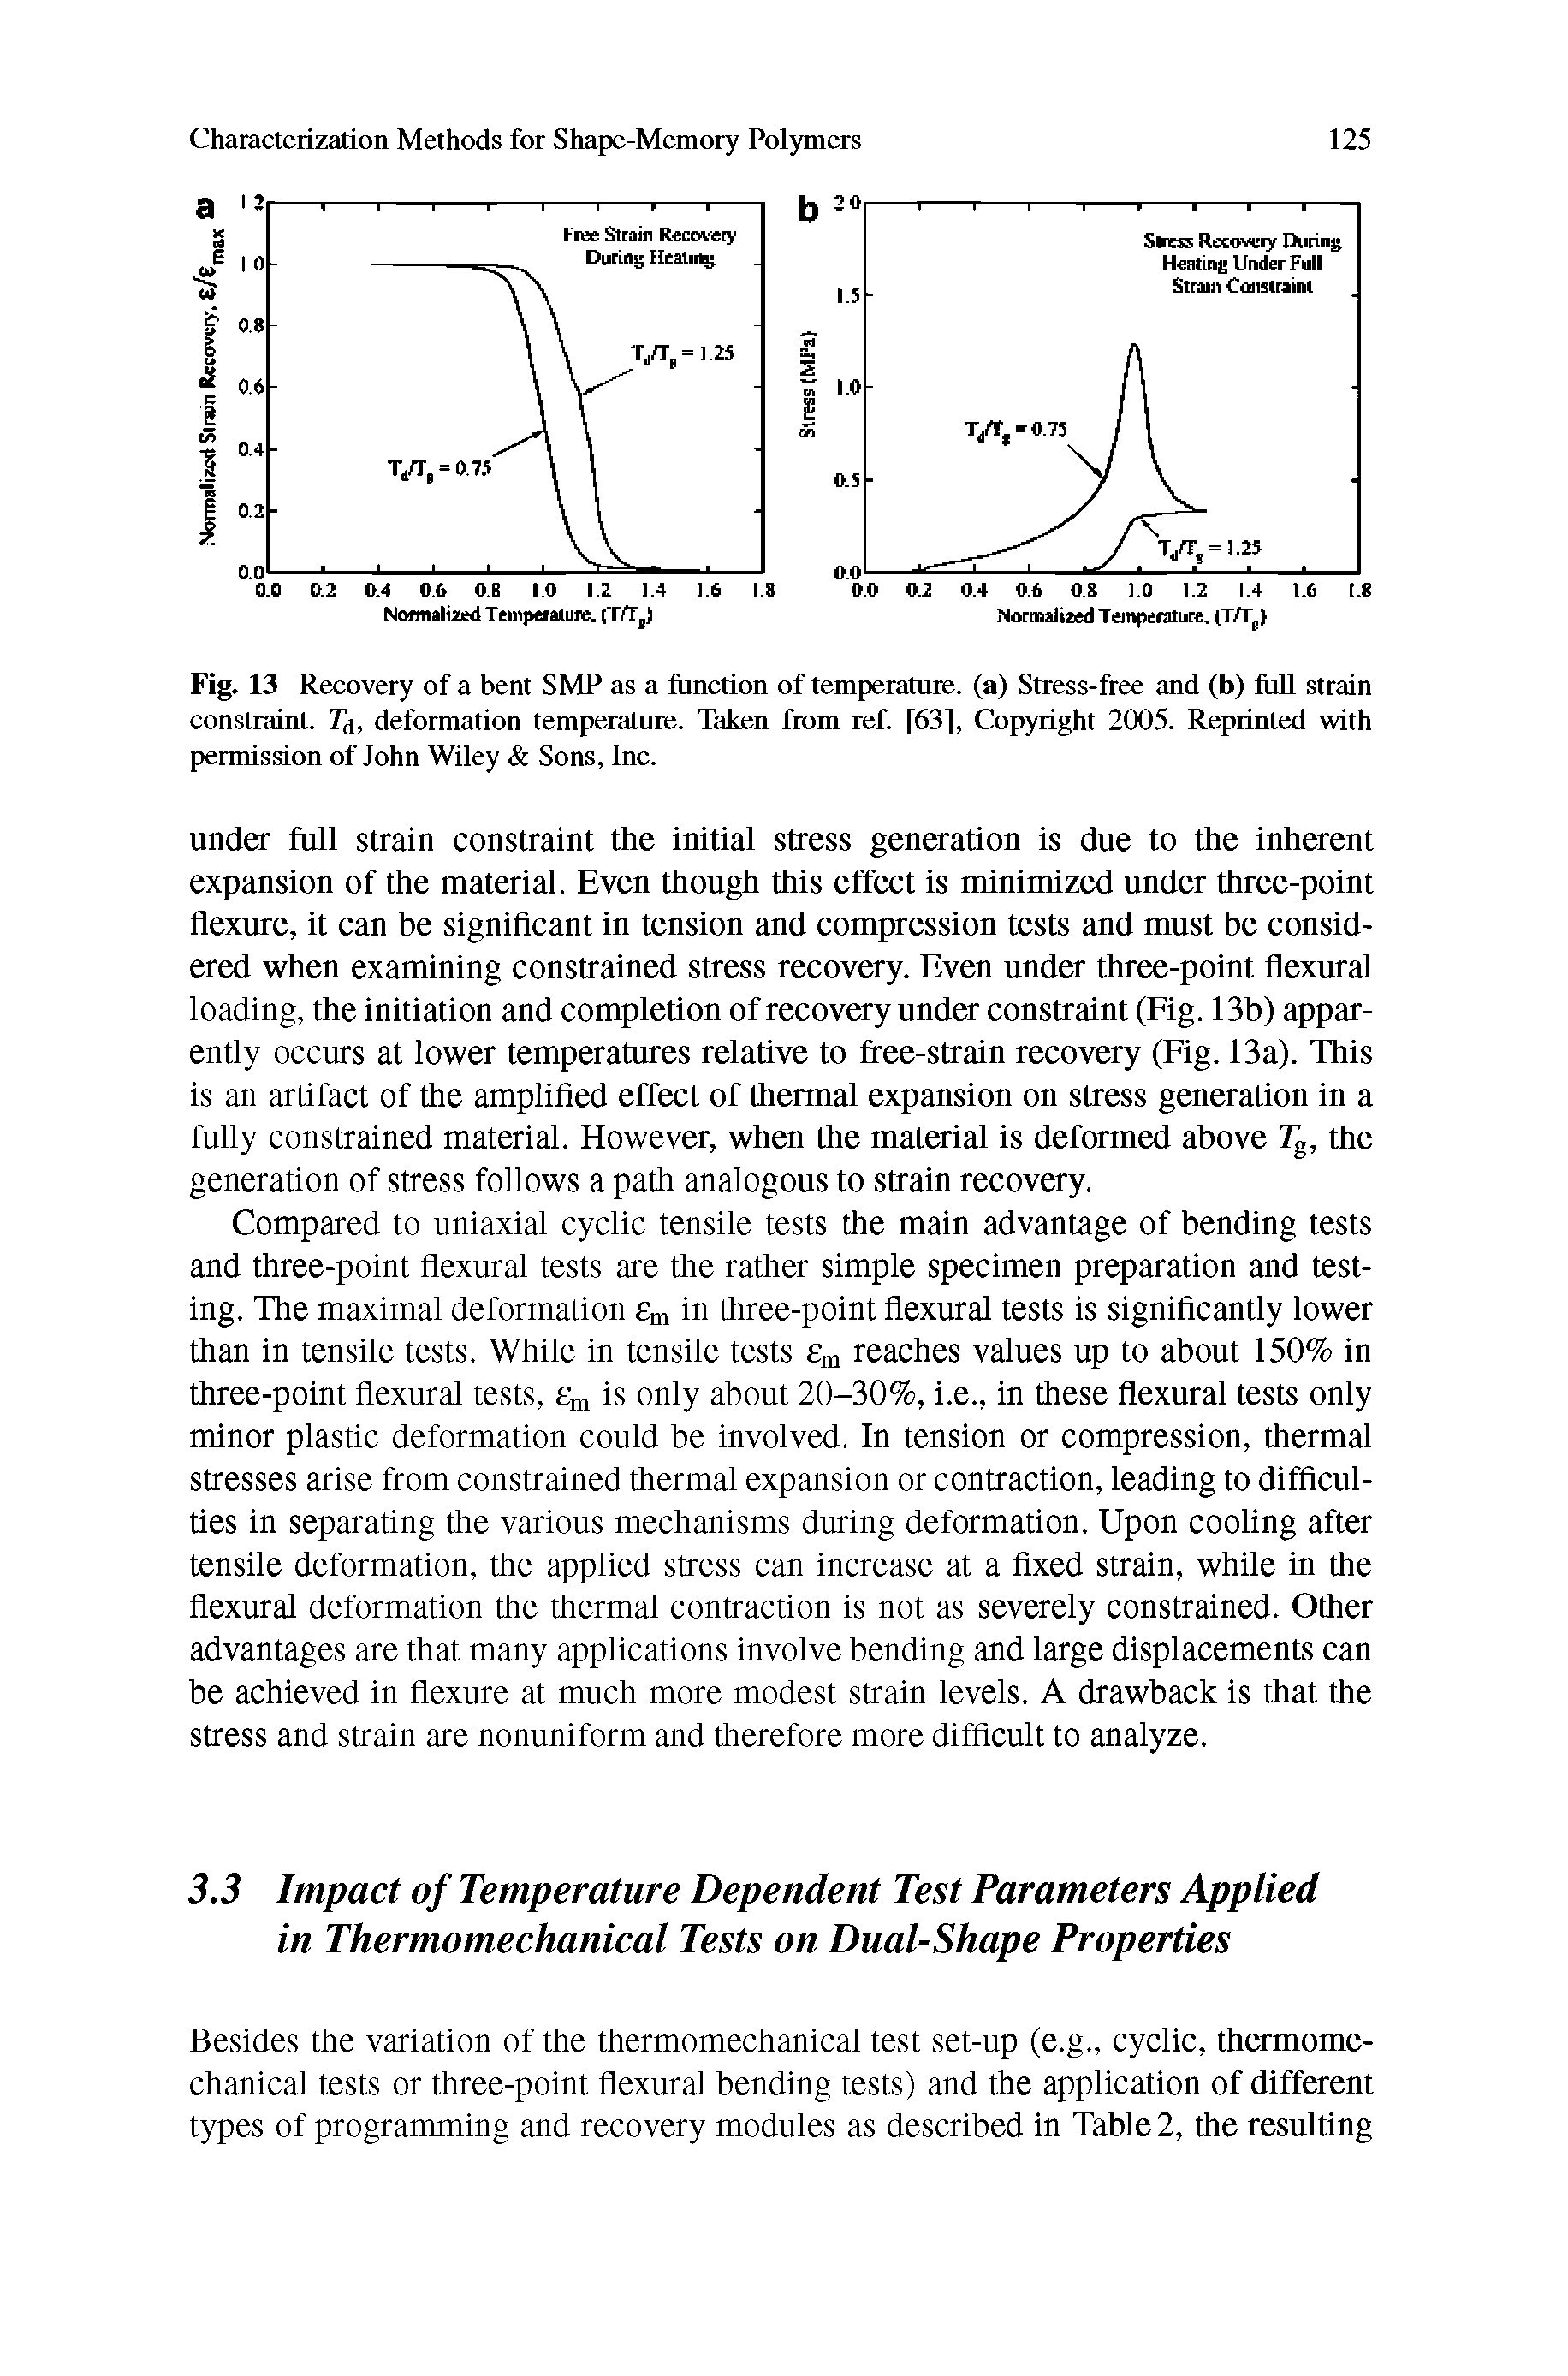 Fig. 13 Recovery of a bent SMP as a function of temperature, (a) Stress-free and (b) Ml strain constraint. T, deformation temperature. Taken from ref. [63], Copyright 2005. Reprinted with permission of John Wiley Sons, Inc.